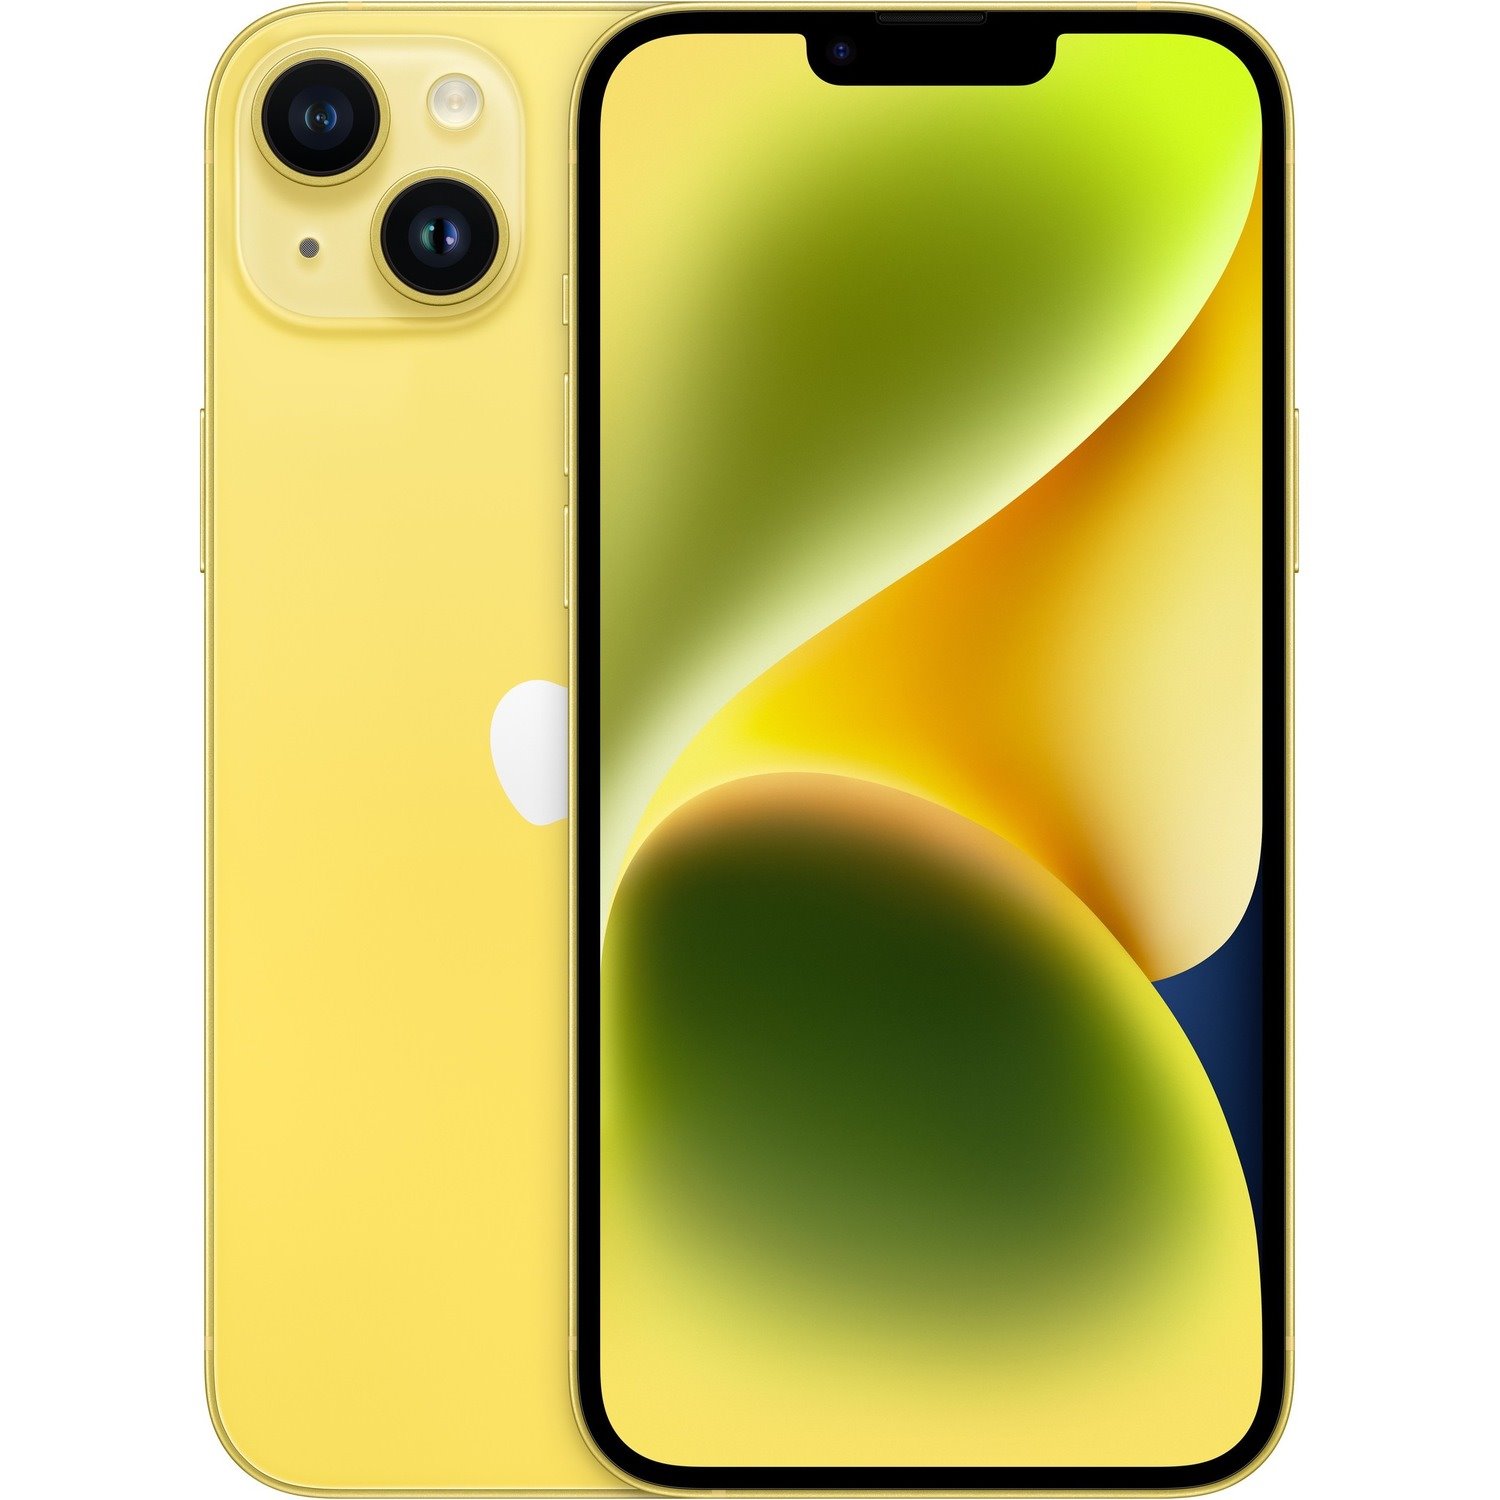 Apple iPhone 14 Plus 128 GB Smartphone - 6.7" OLED 2778 x 1284 - Hexa-core (AvalancheDual-core (2 Core) 3.23 GHz + Blizzard Quad-core (4 Core) 1.82 GHz - 6 GB RAM - iOS 16 - 5G - Yellow